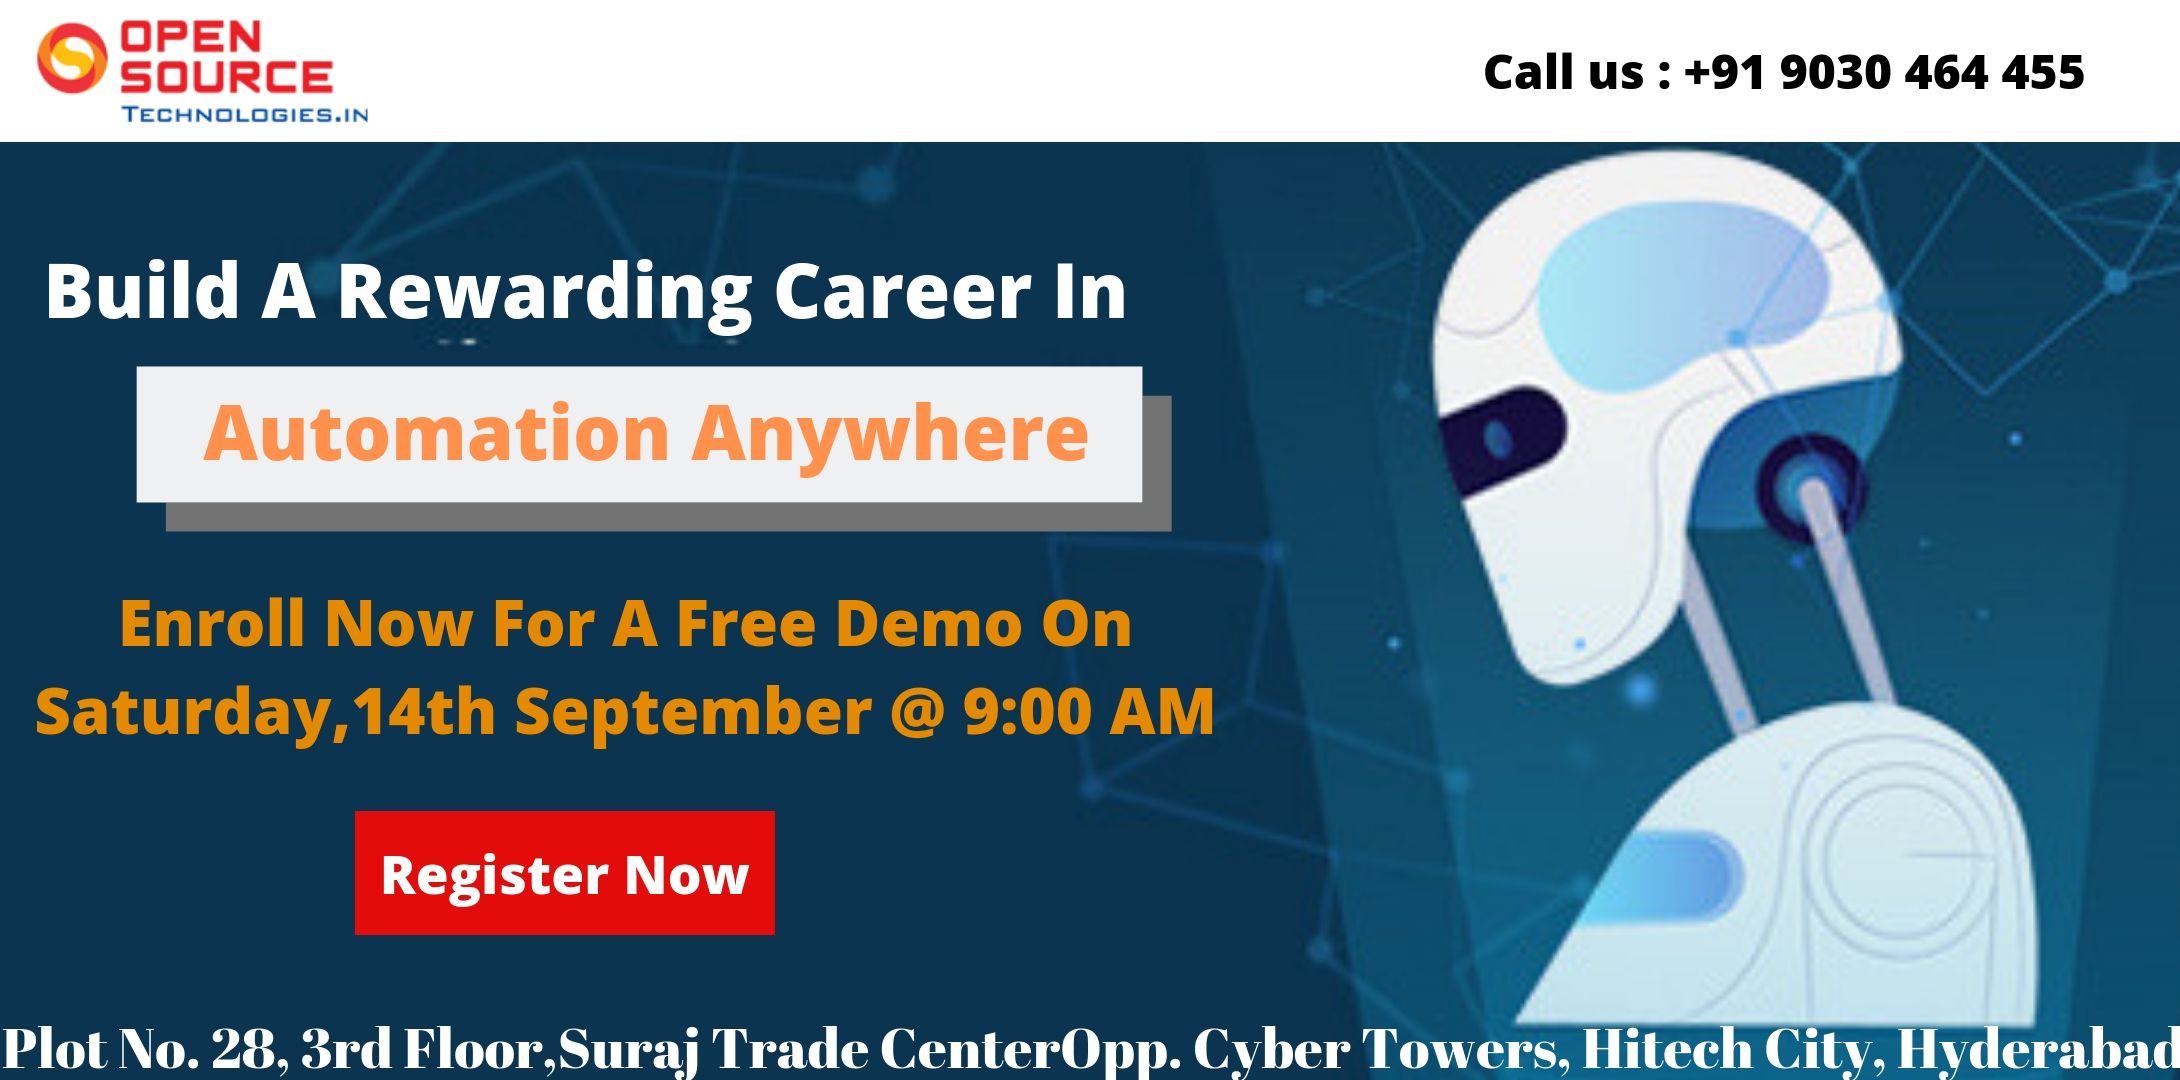 Attend Free Demo on Automation Anywhere-Gain Clear Insights To Career In RPA By Open Source Technologies On 14th Sep 2019 9:00 AM Hyderabad, Hyderabad, Telangana, India